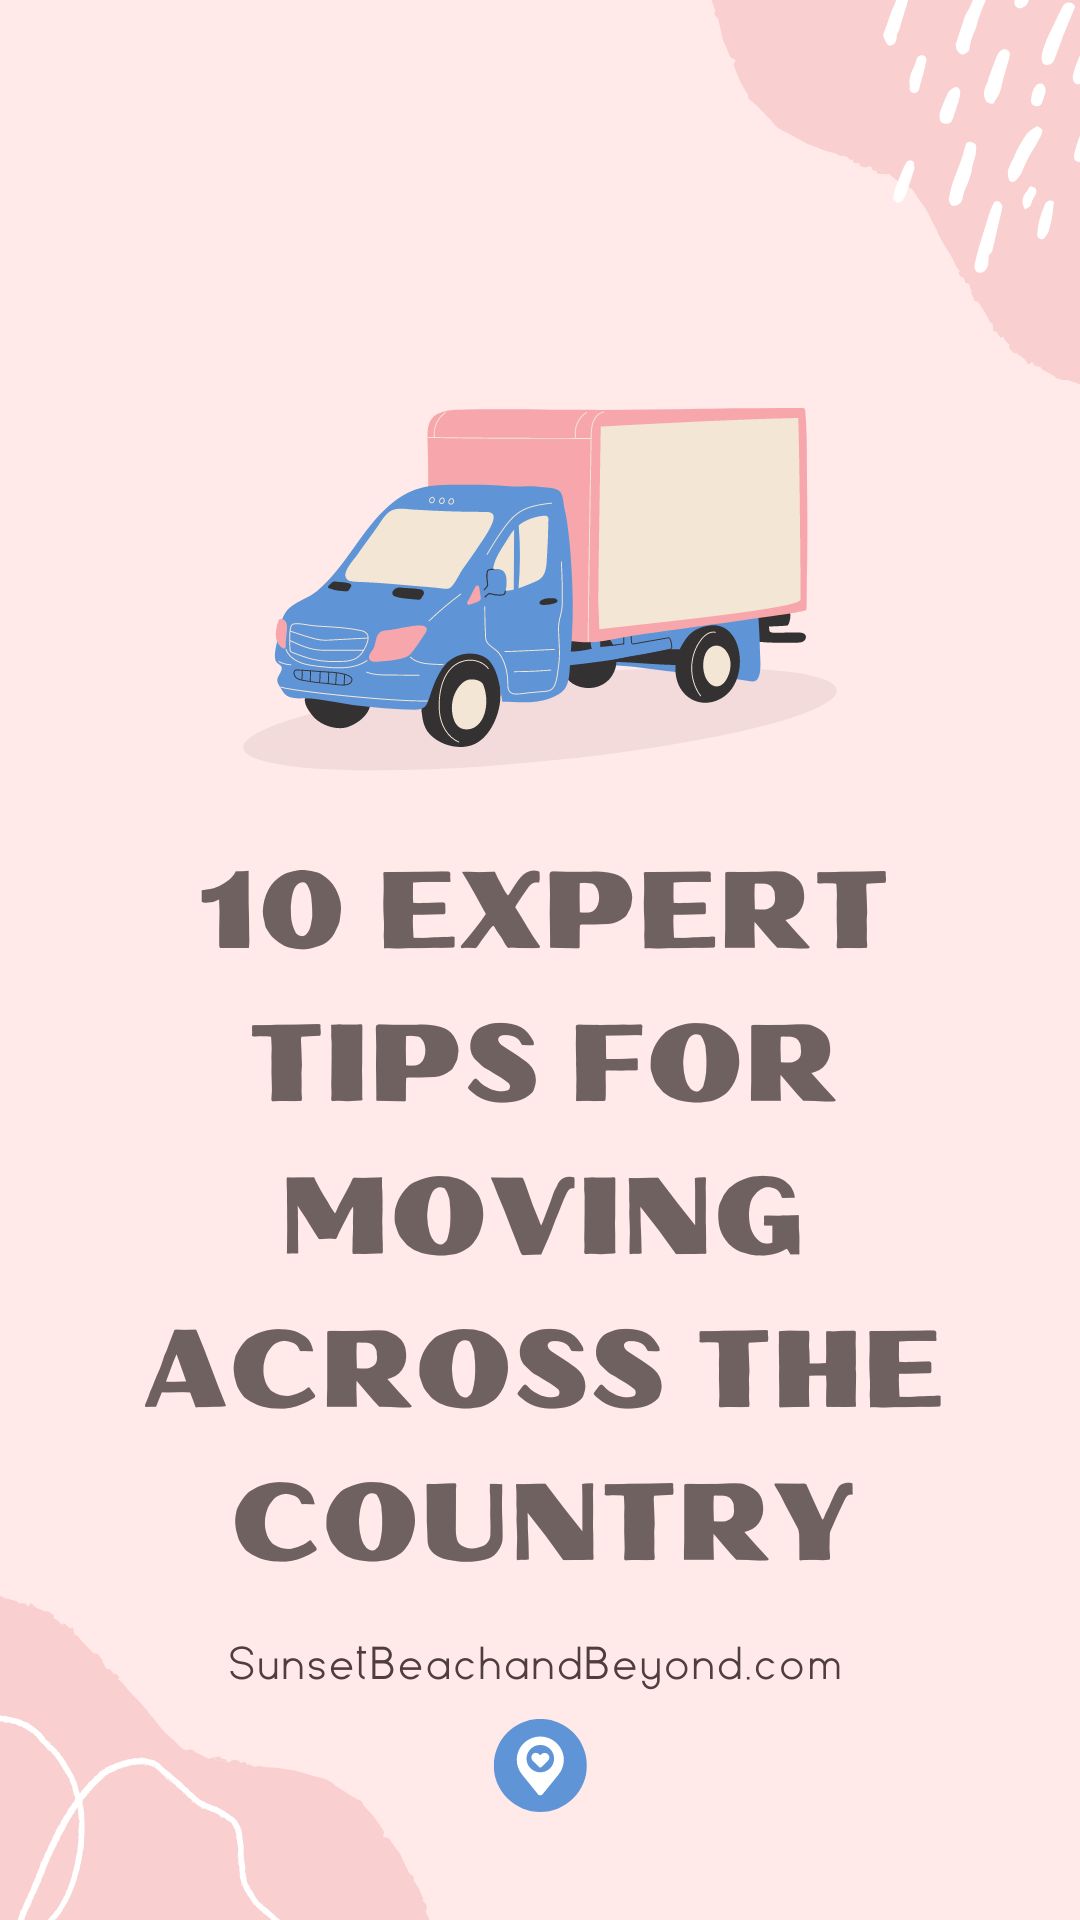 10 Expert Tips for Moving Across the Country